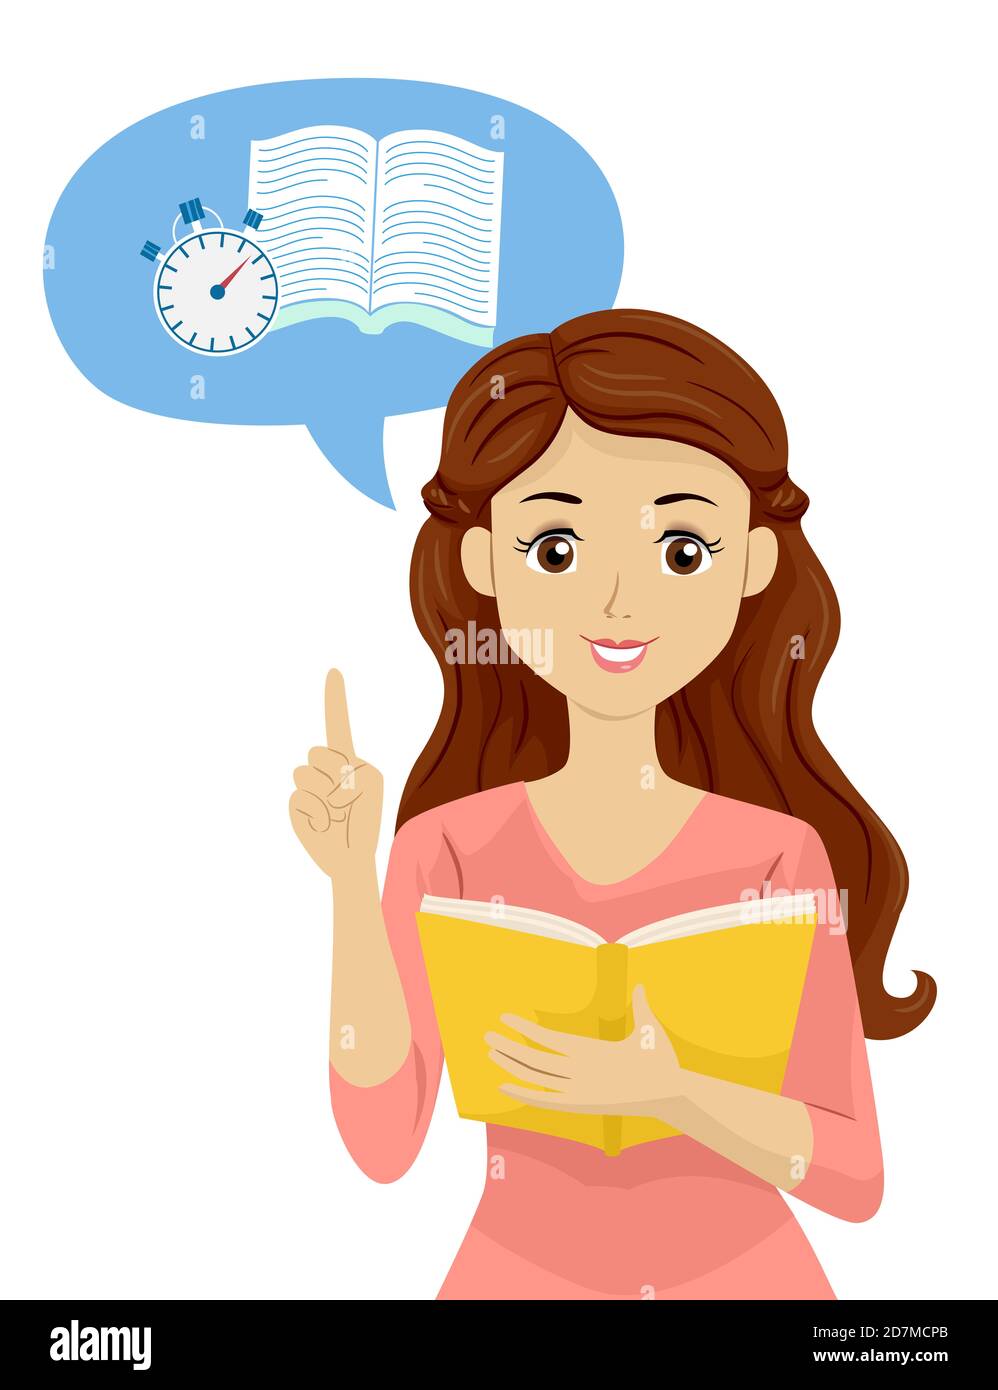 Illustration of a Teenage Girl Talking About Speed Reading Stock Photo